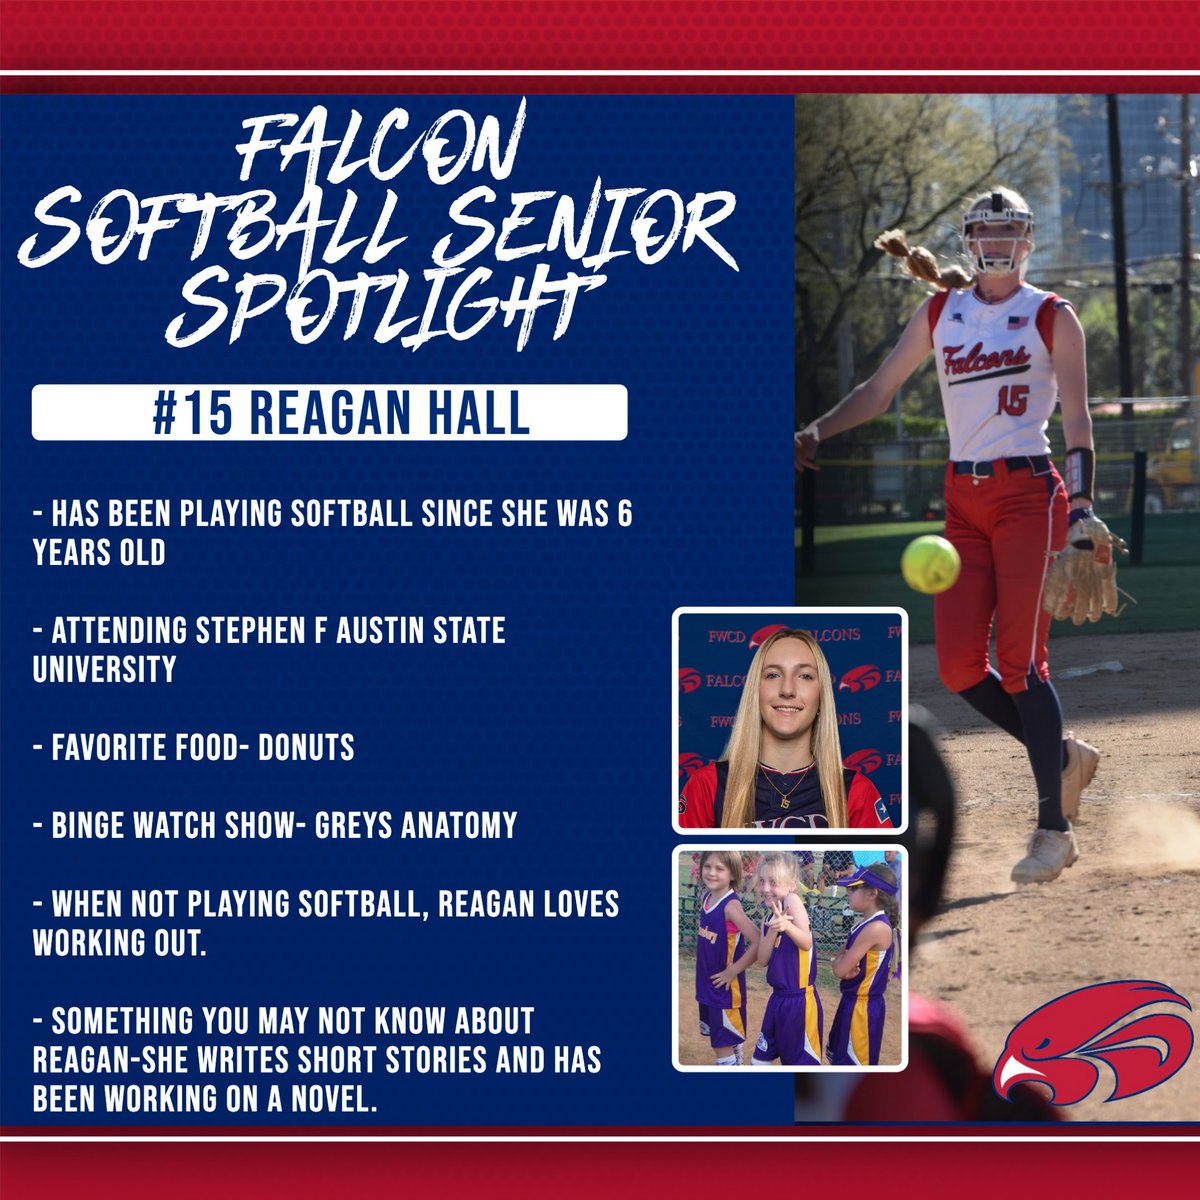 Next up, our Dr. Pepper-drinkin' pitcher/outfielder, #15 Reagan Hall!!! #LEAD #FWCD #FlyHigher